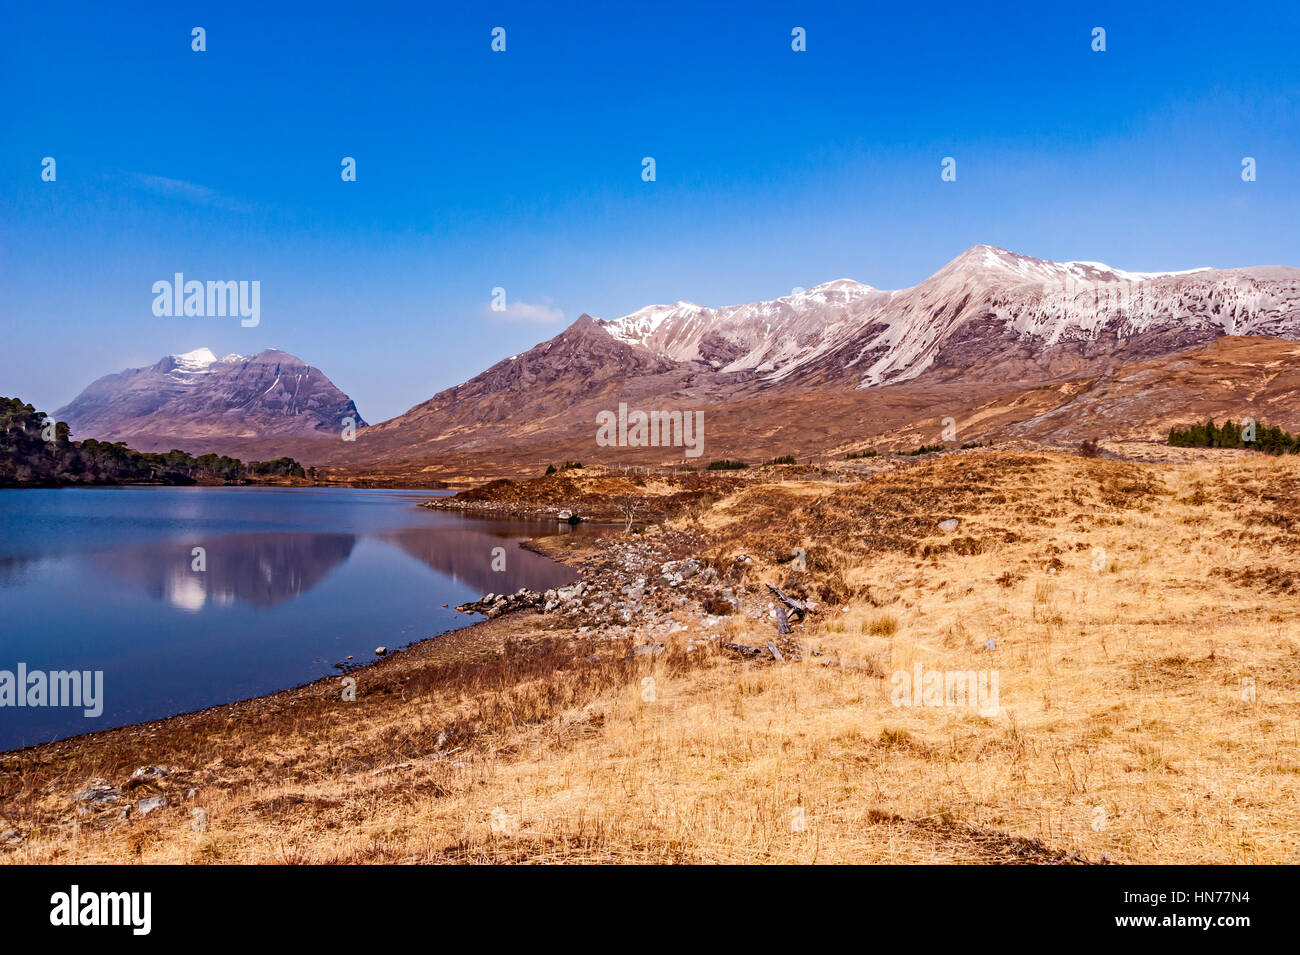 Famous Torridon mountains Liathach (L)and Beinn Eighe (R) viewed from Loch Clair in Glen Torridon Scottish Highlands Scotland UK Stock Photo